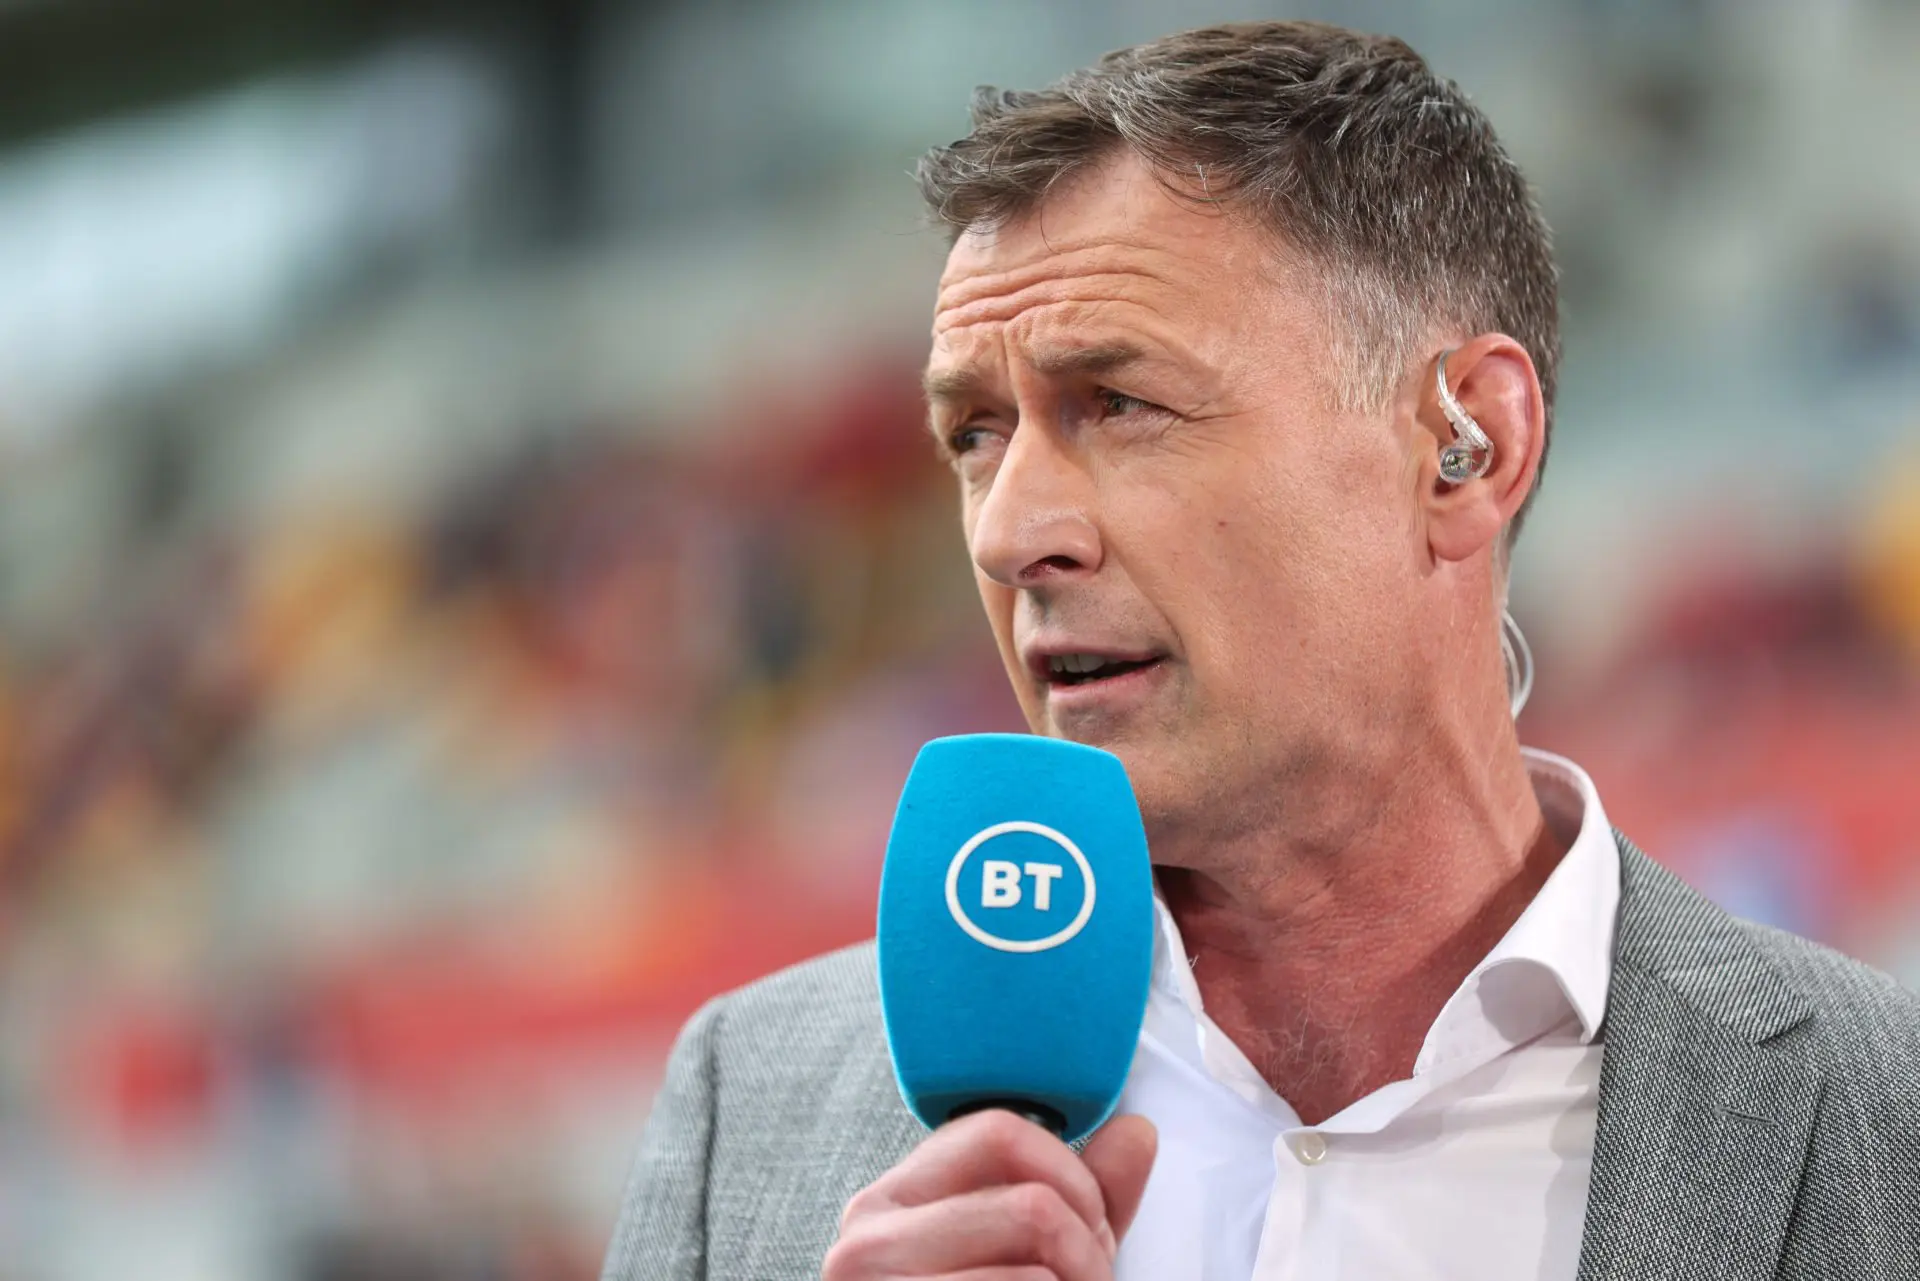 EPL: ‘It’s not his fault’ – Sutton defends Haaland after Roy Keane’s scathing attack